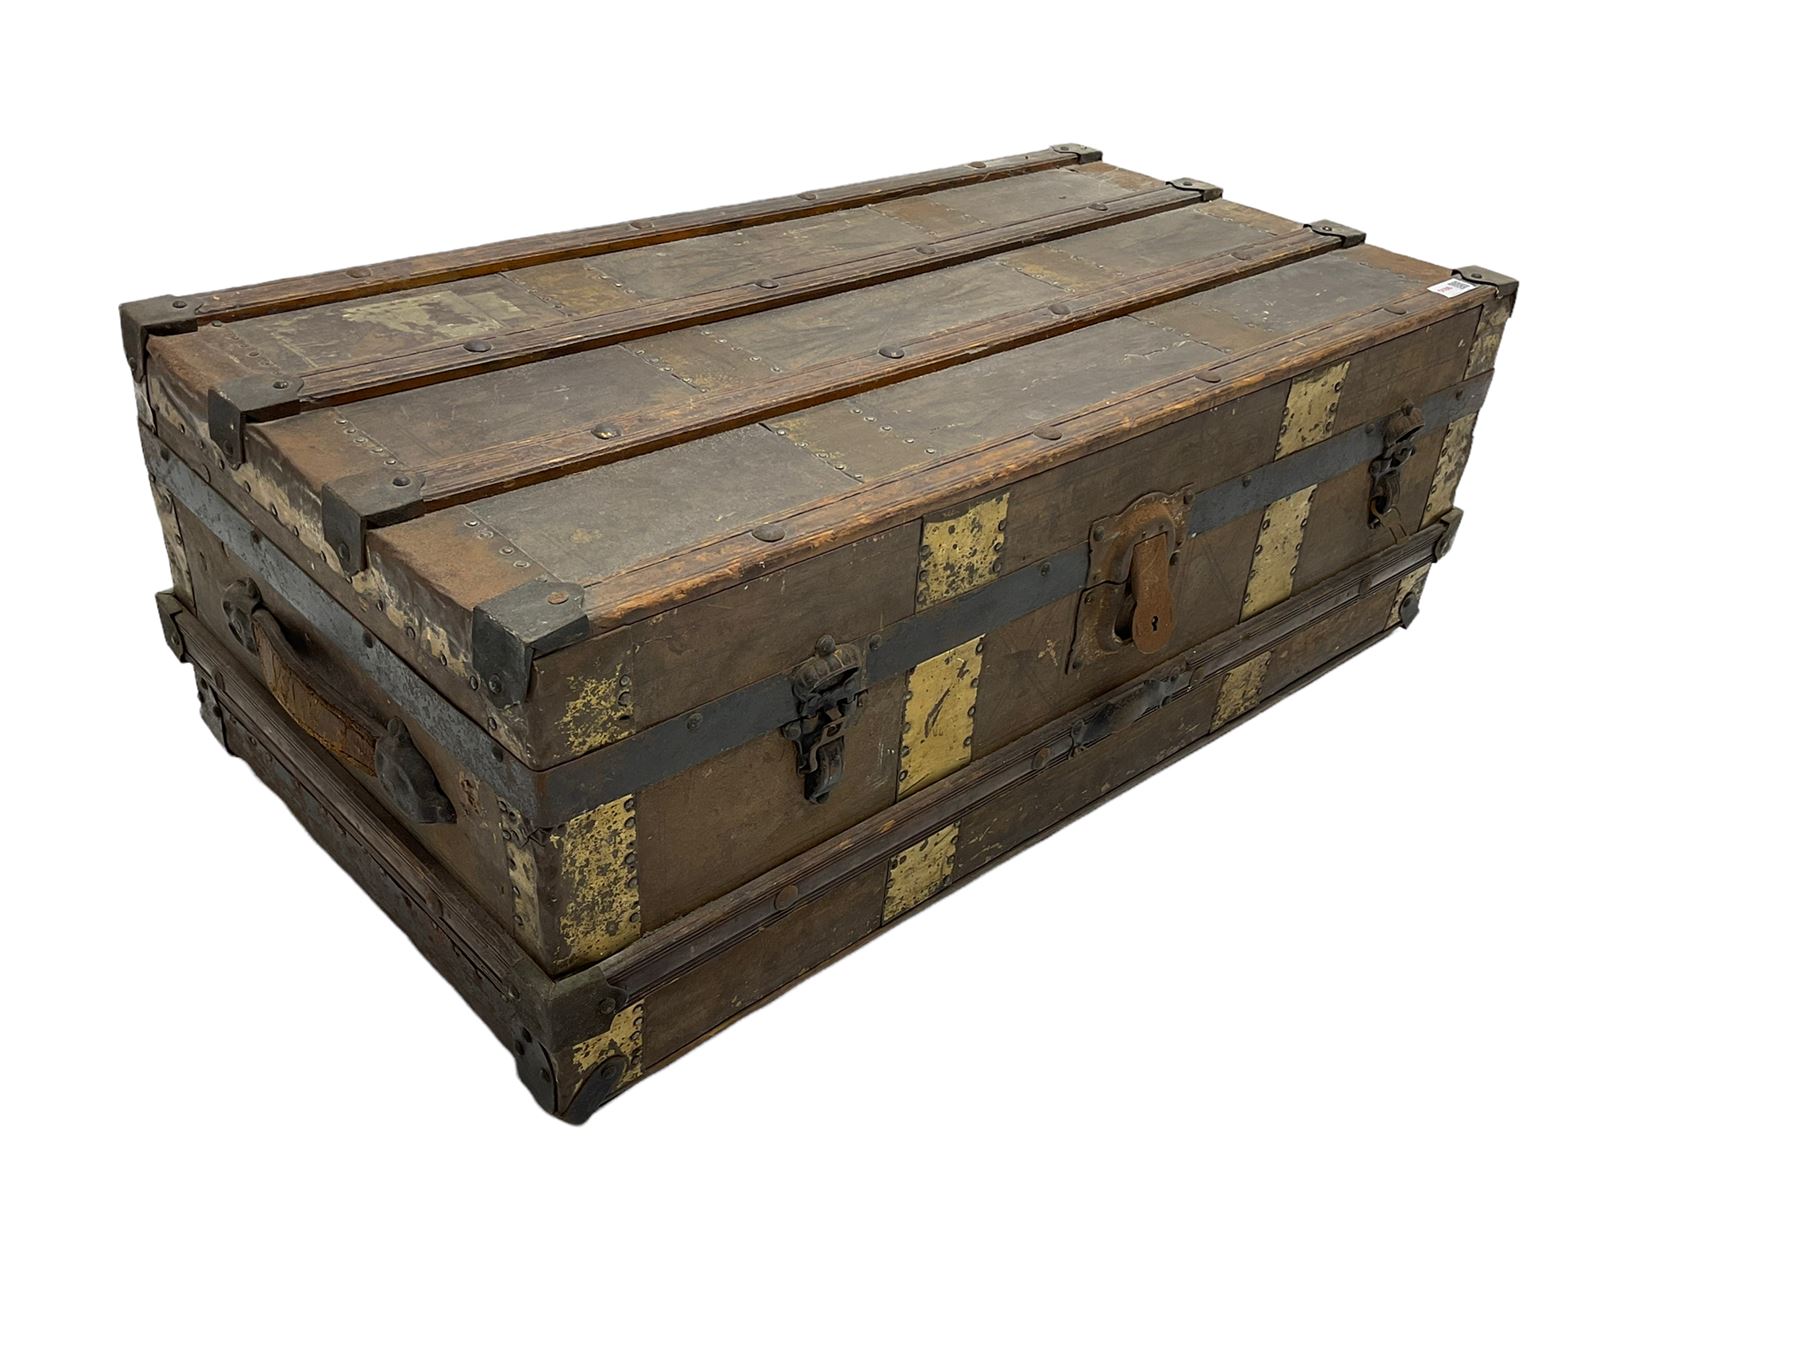 Early 20th wooden and metal bound trunk - Image 2 of 2